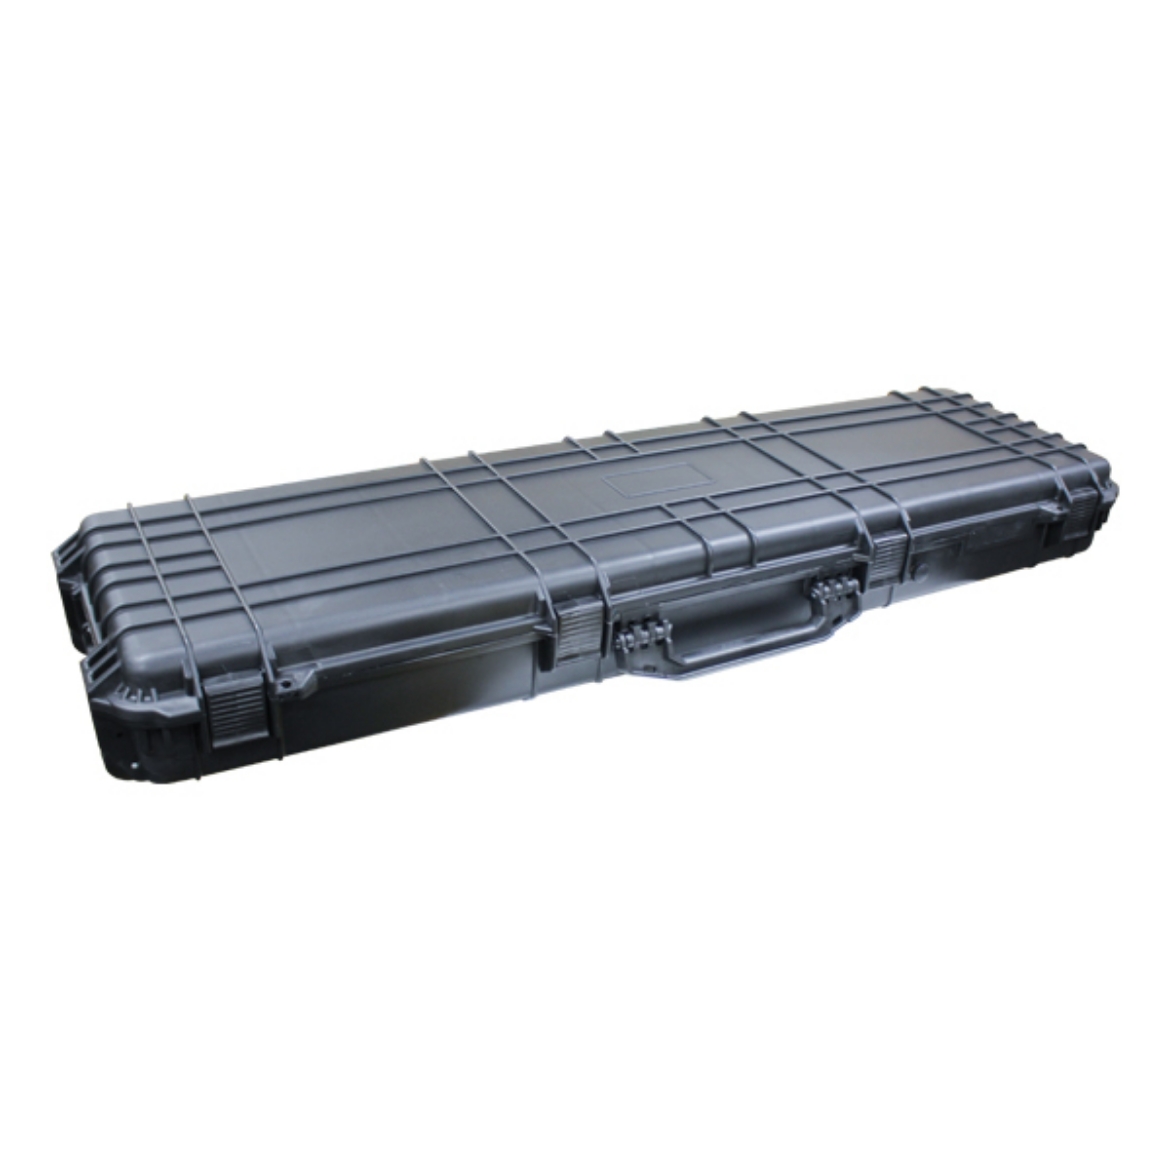 Picture of 1346 X 406X155 (GUN CASE) WATER AND SHOCK PROOF SEALCASE (SAFE CASE)